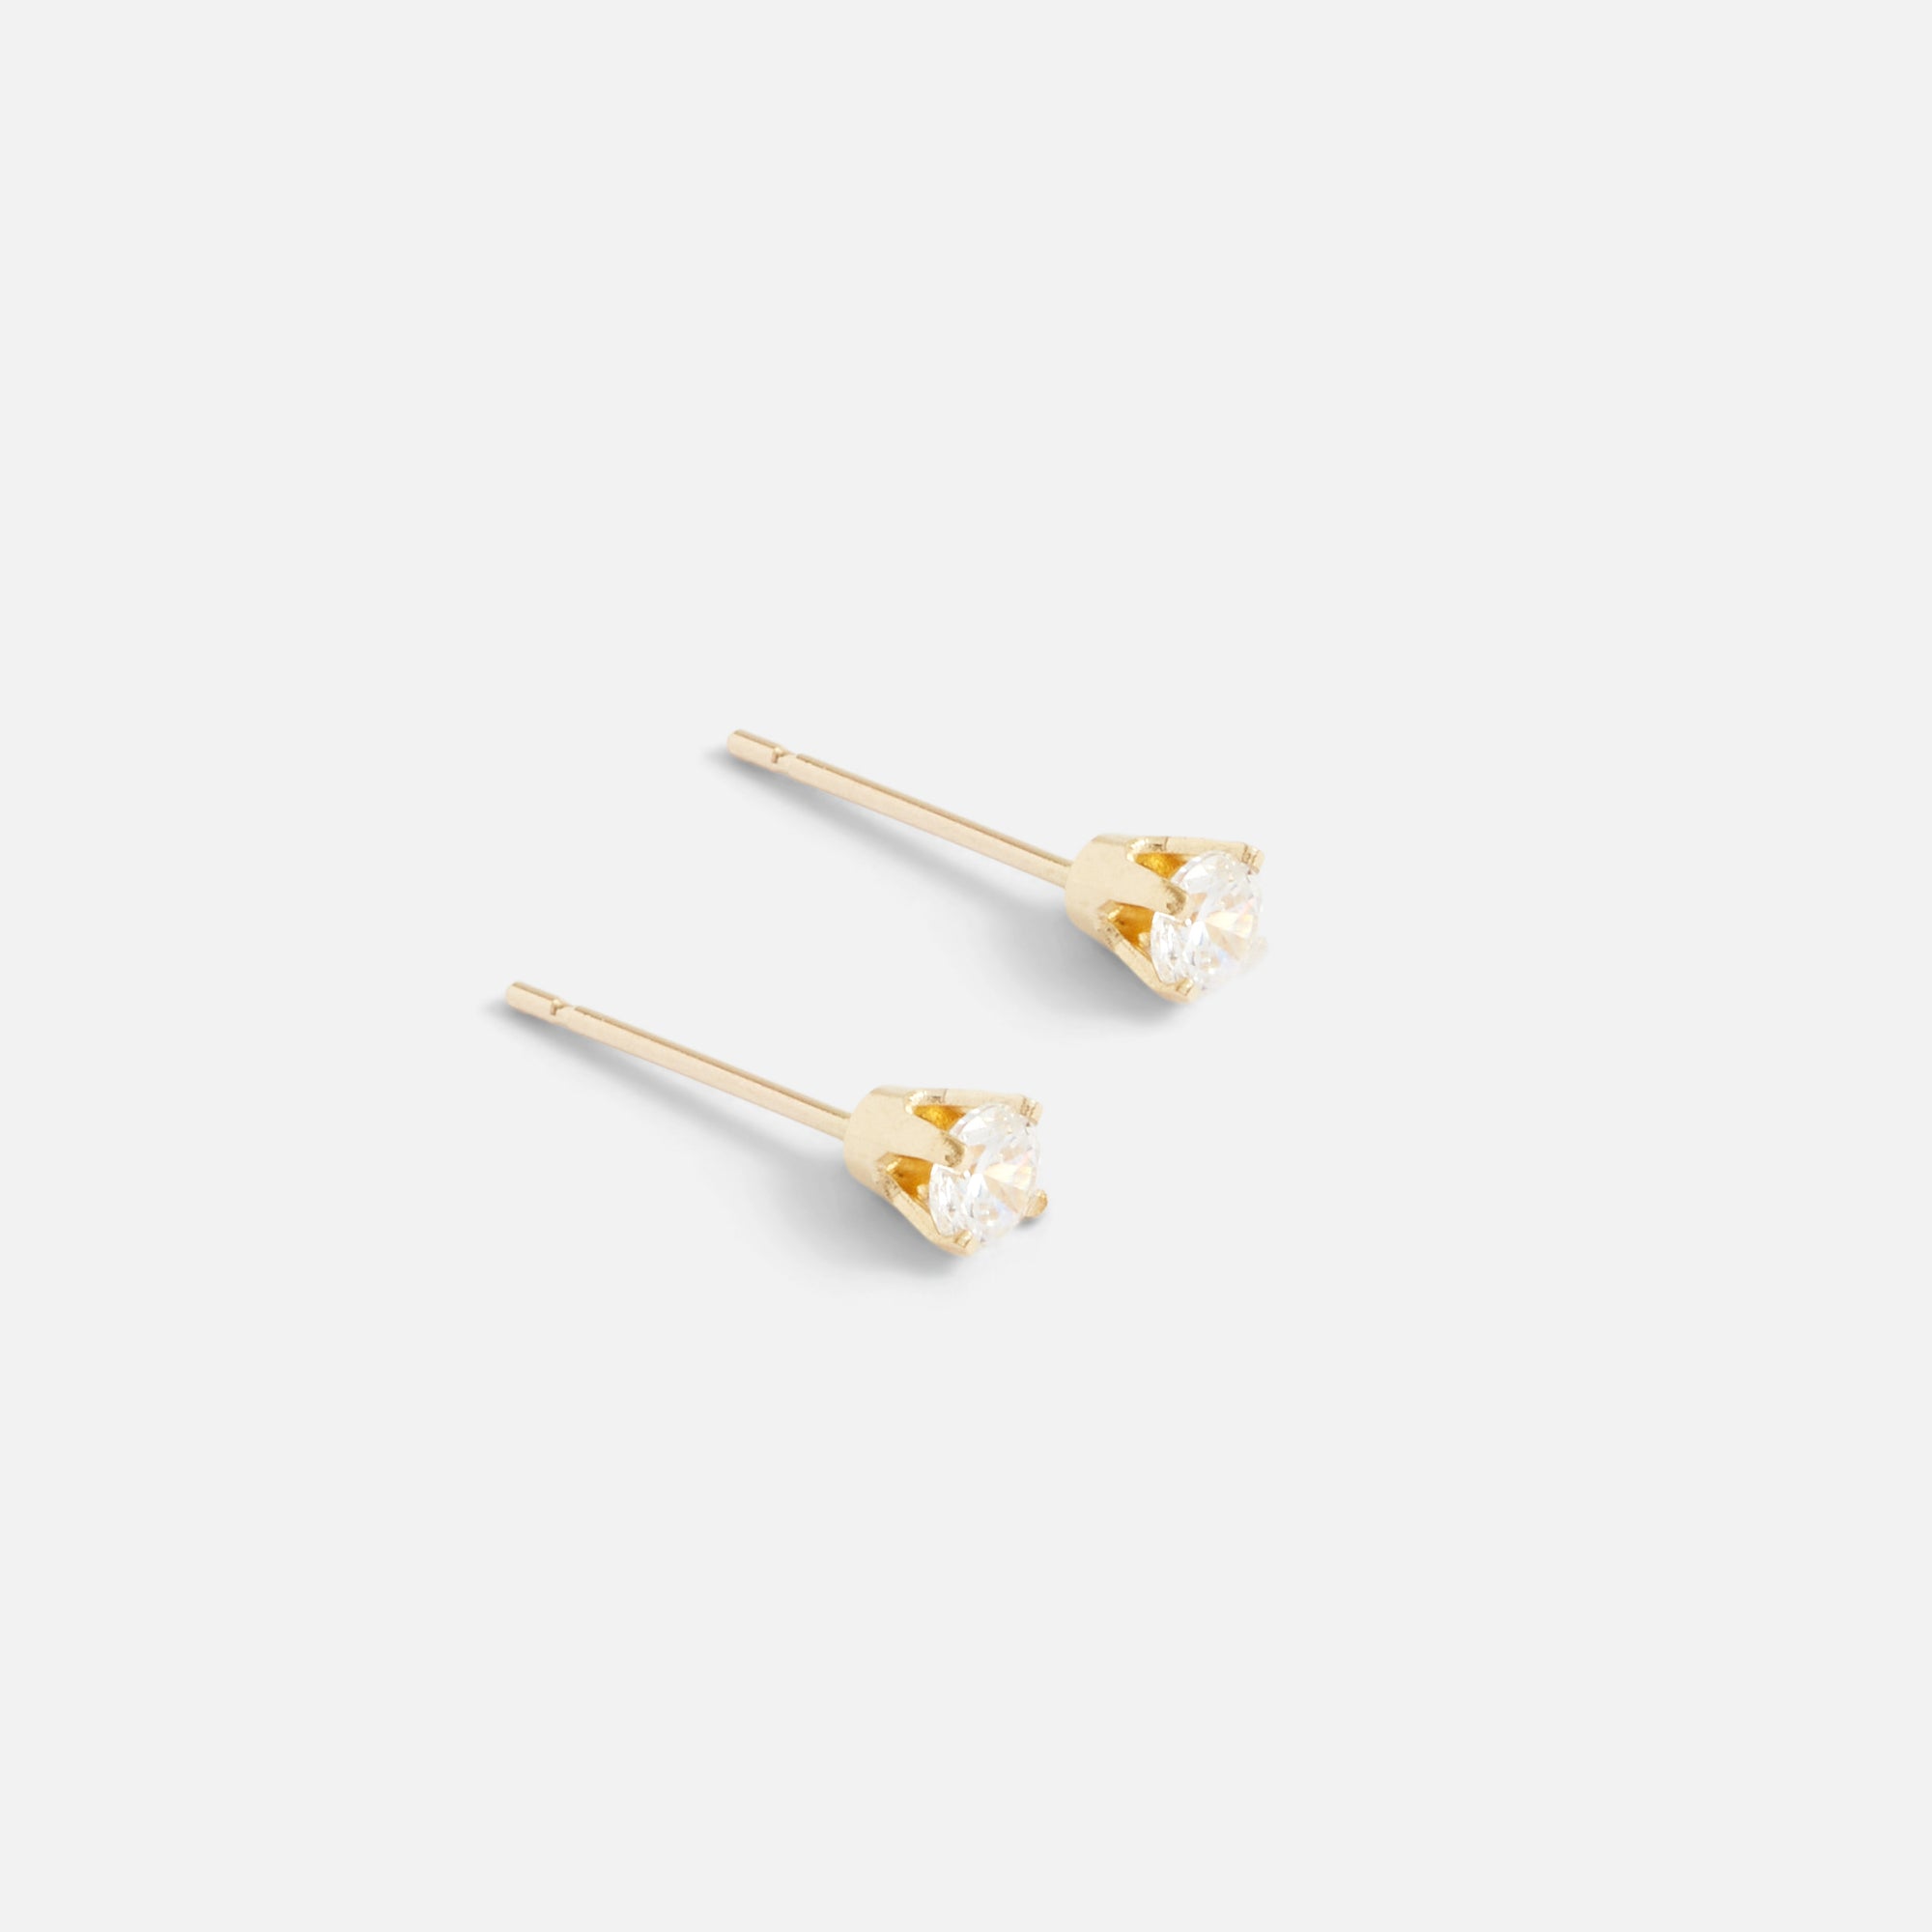 10k gold earrings with 2mm cubic zirconia